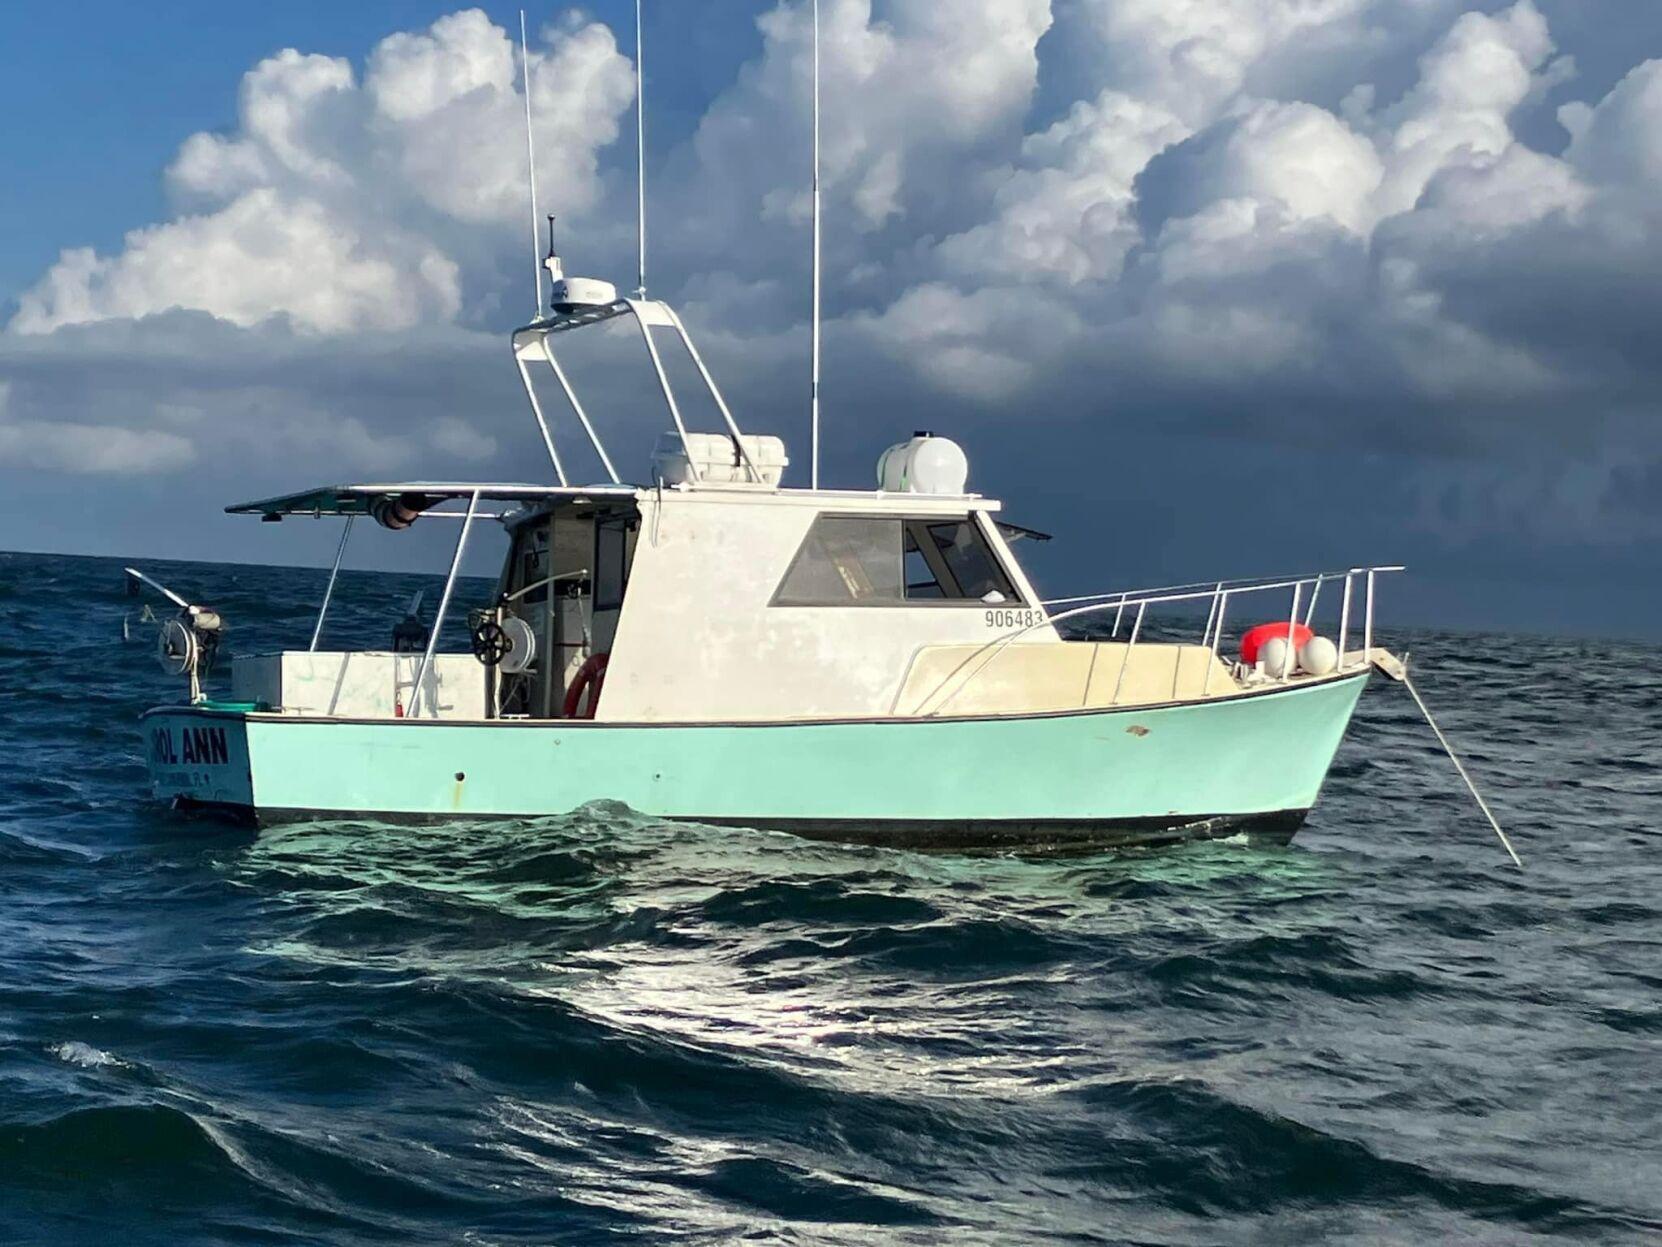 UPDATE: Potential sighting of missing fishing boat ignites new hope, Local  News